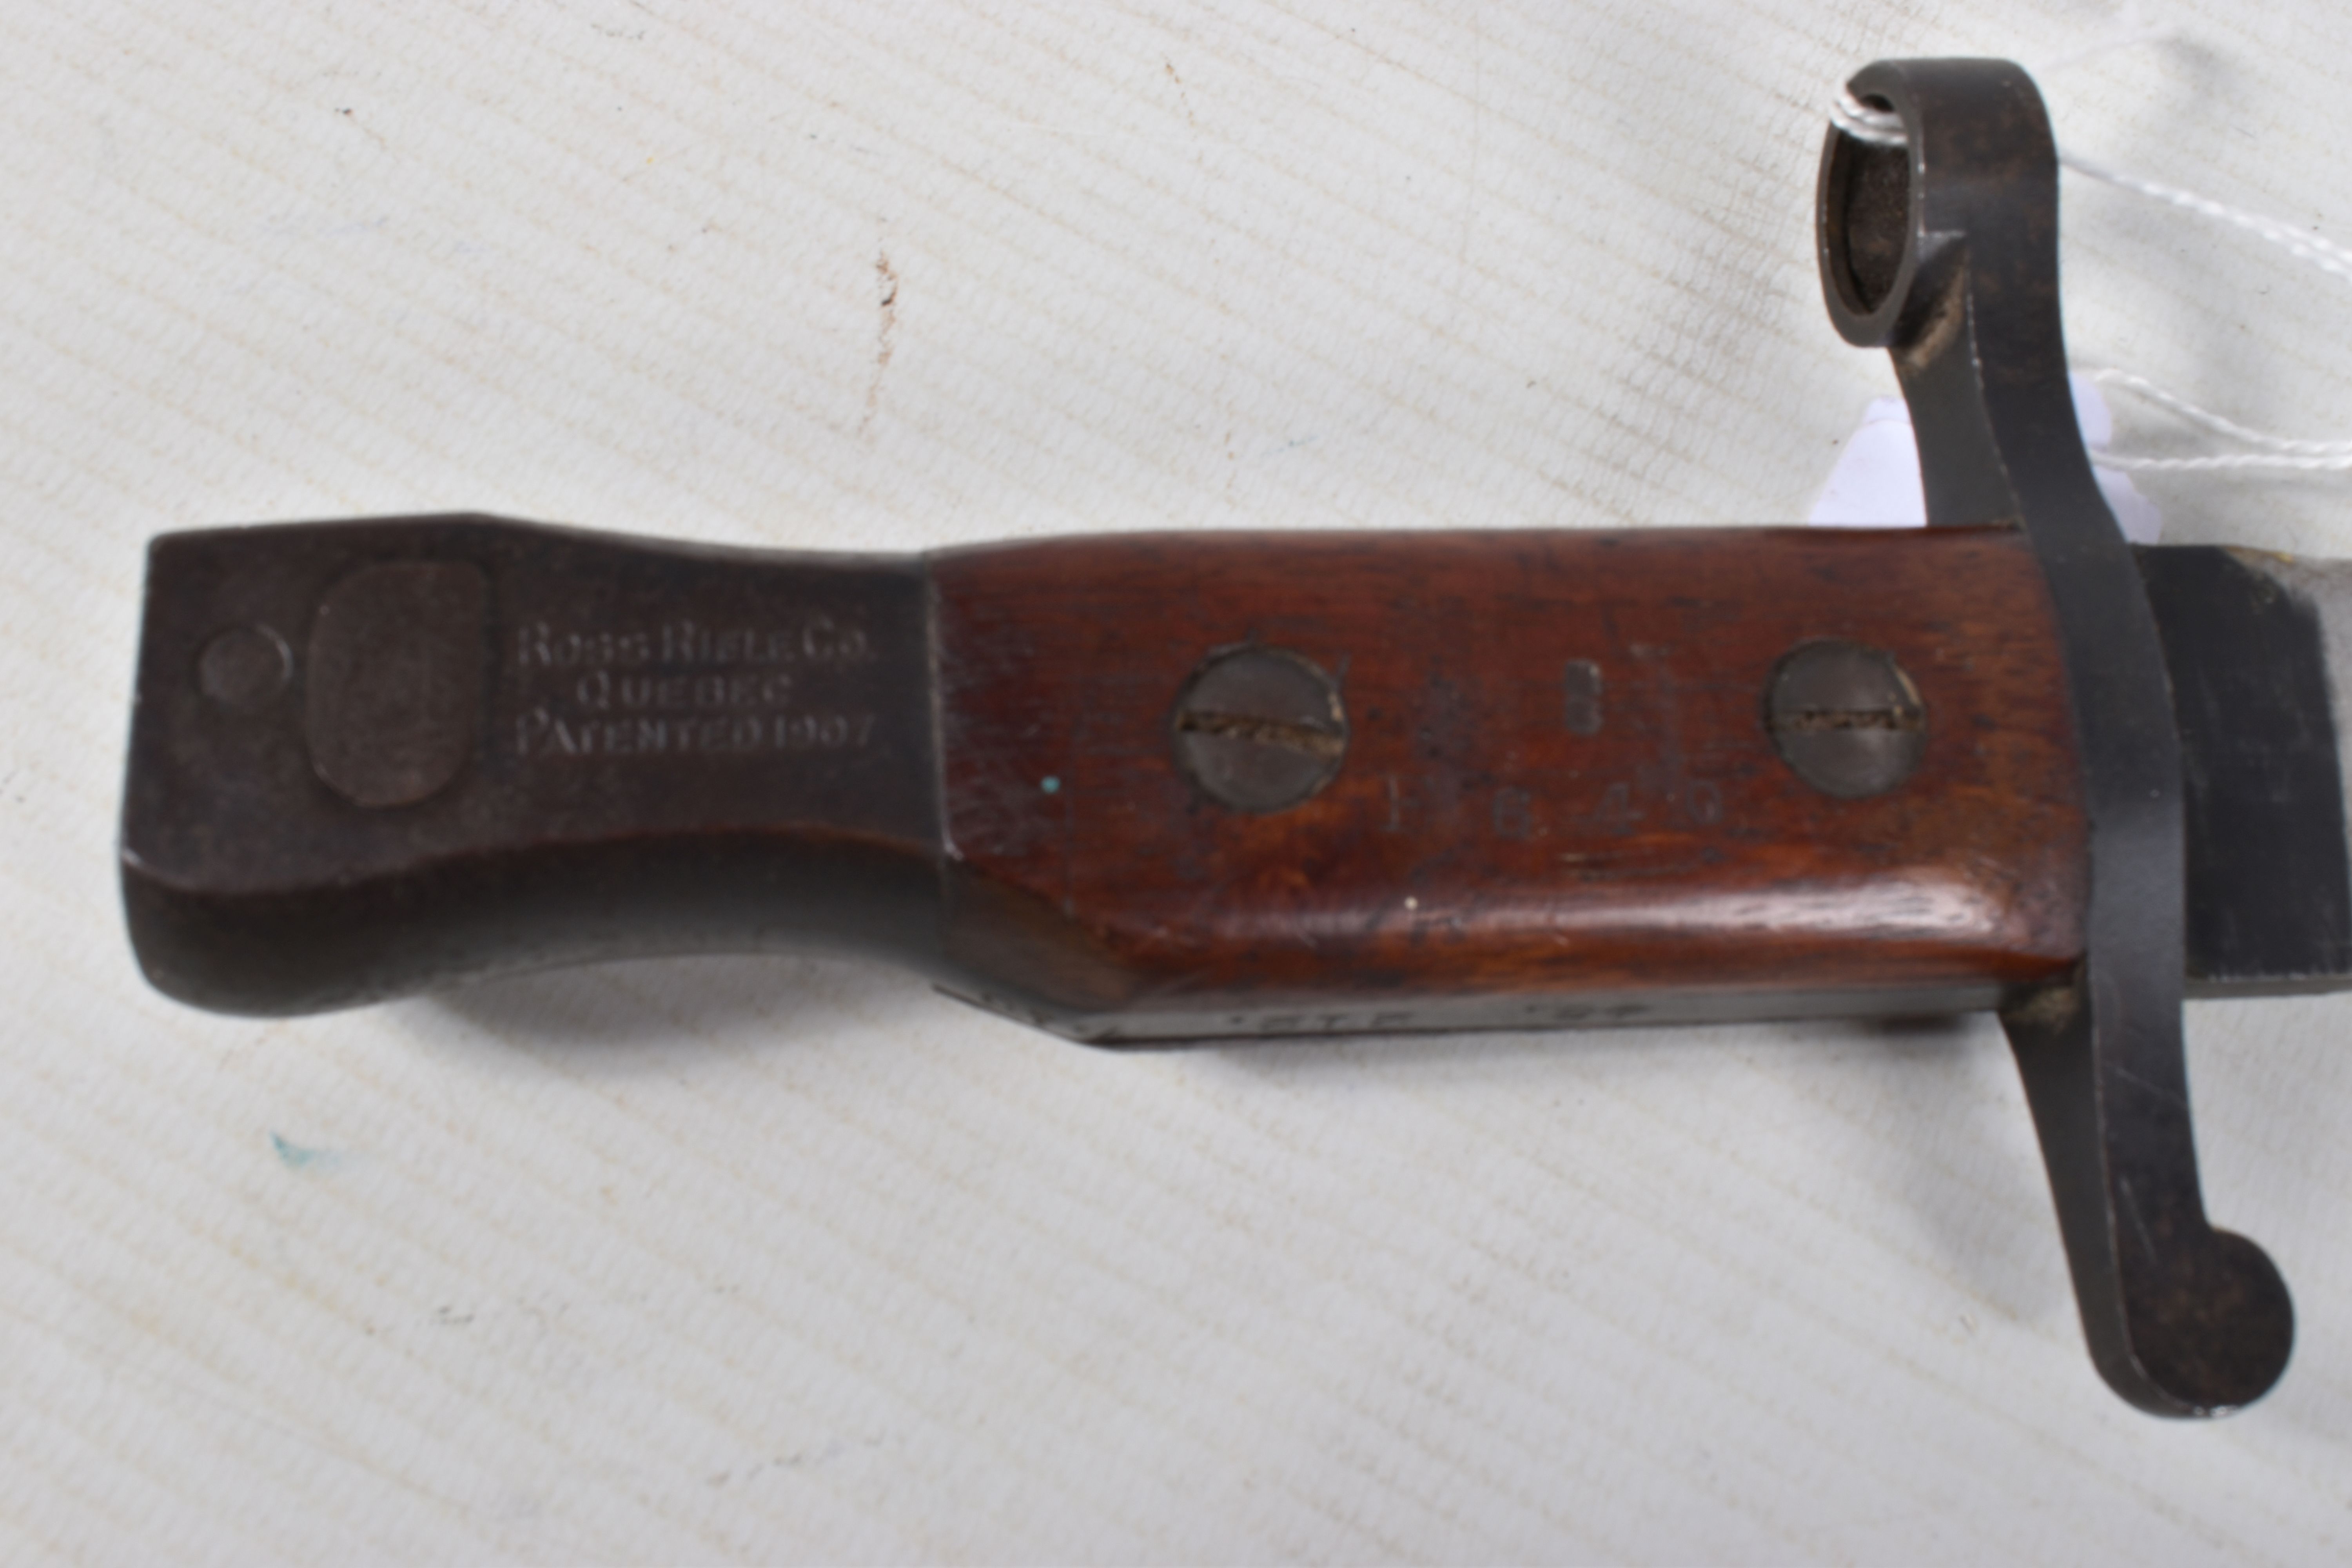 A 1907 PATTERN CANADIAN ROSS RIFLE BAYONET, the blade us unmarked but the handle has 48-H on one - Image 12 of 16